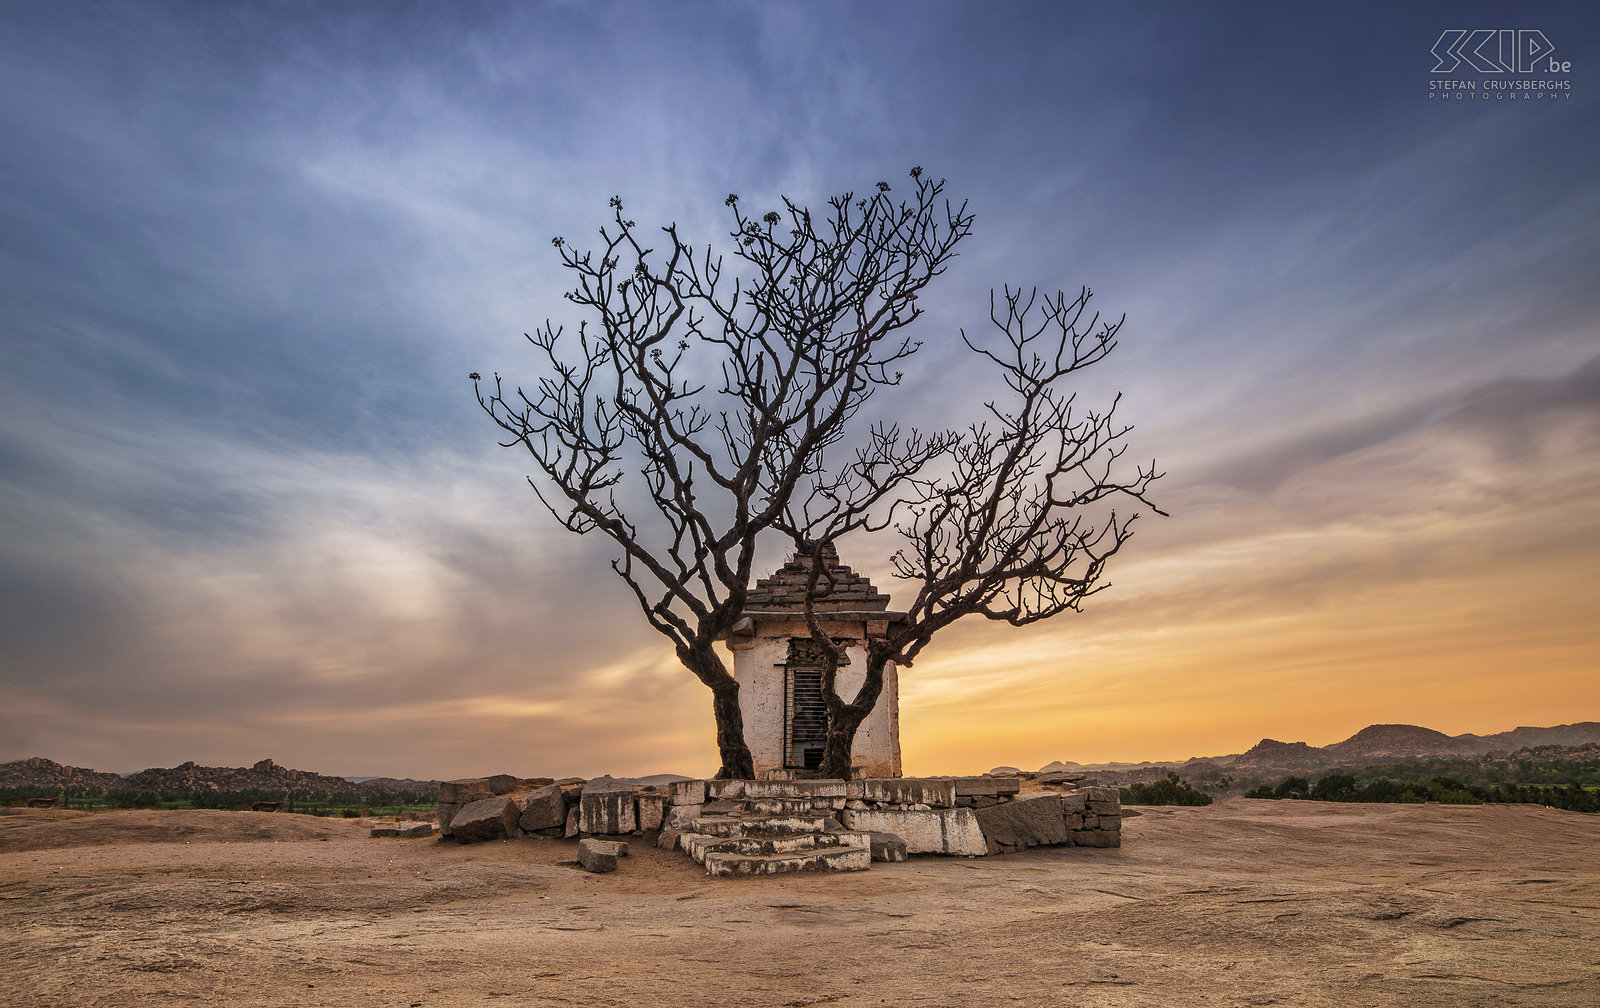 Hampi - Hemakuda hill - Hanuman shrine The small Hanuman shrine at the Hemakuta hill in Hampi at sunset. Hampi was one of the richest and largest cities in the world from the 13th to 17th century. It is still a magical place with beautiful landscapes rocks, boulders and palm trees and impressive ruins of temples, palaces and shrines. Stefan Cruysberghs